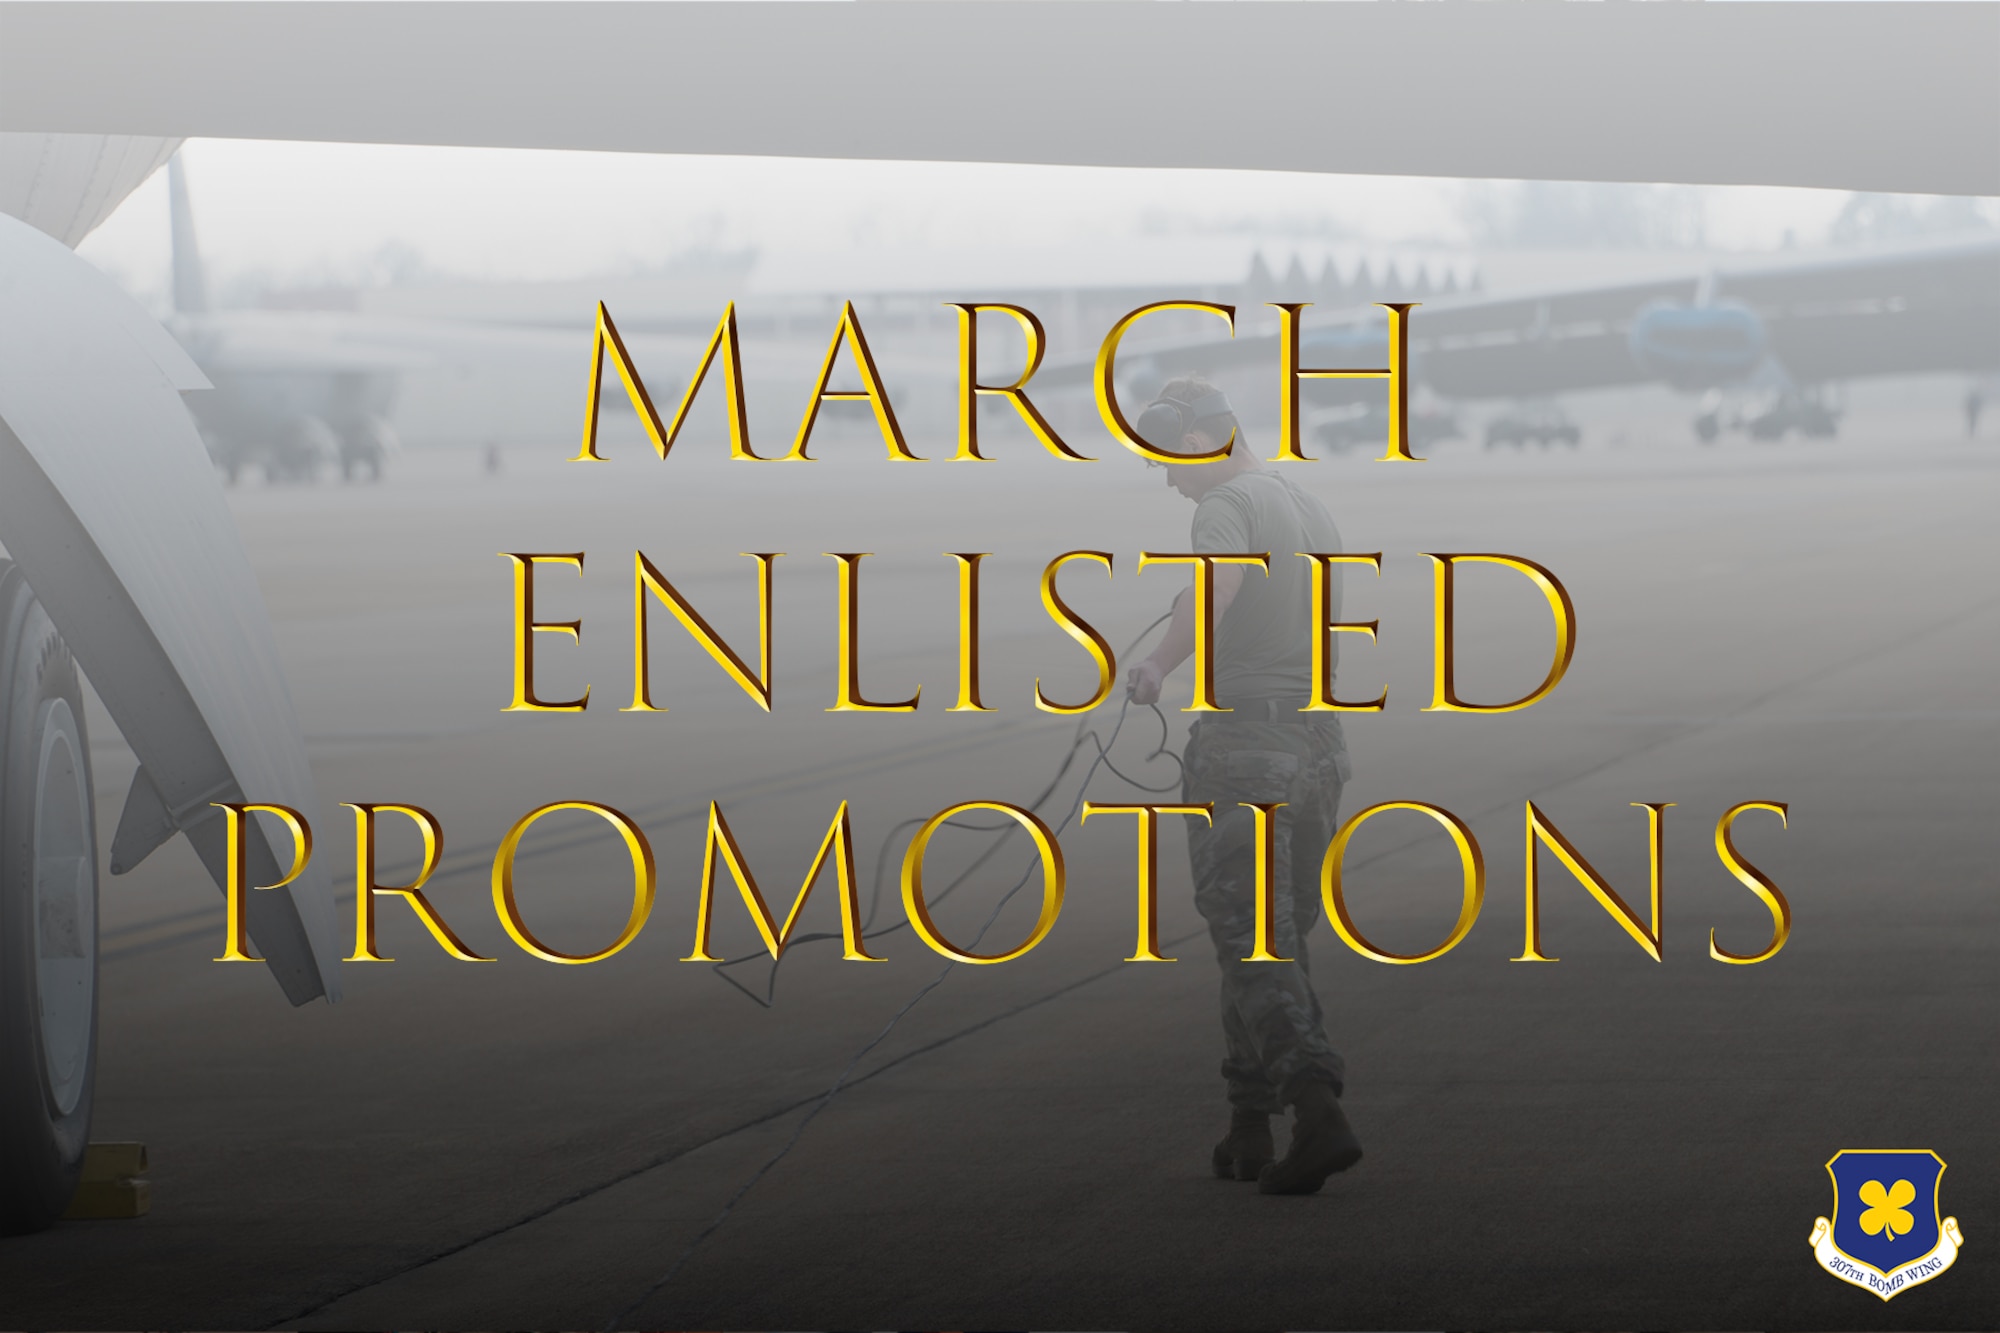 Photo of airman working with words March Enlisted Promotions overlaid.